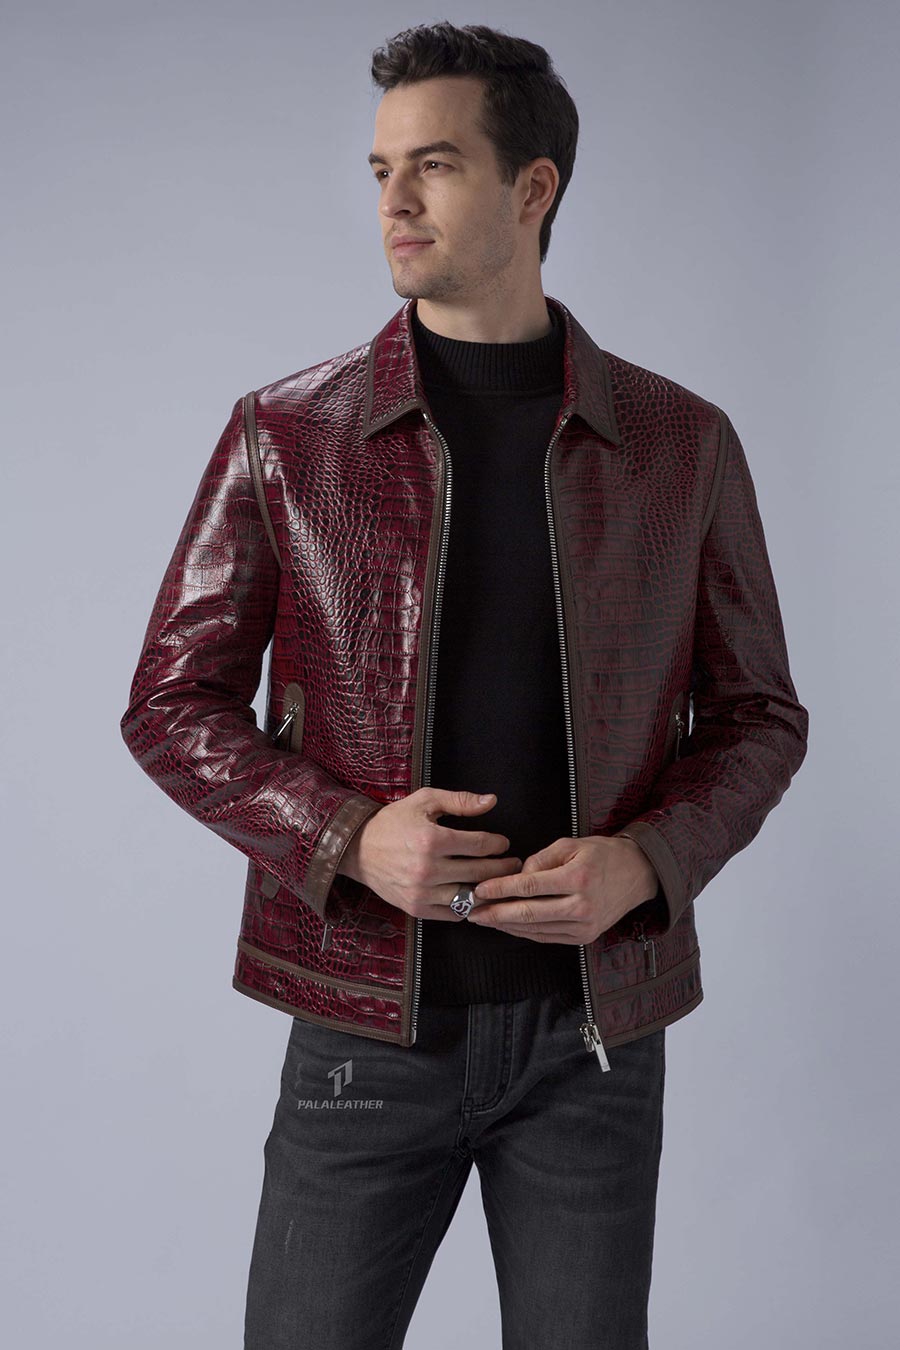 5 Best Leather Jackets Perfect for Fall and Winter 2022